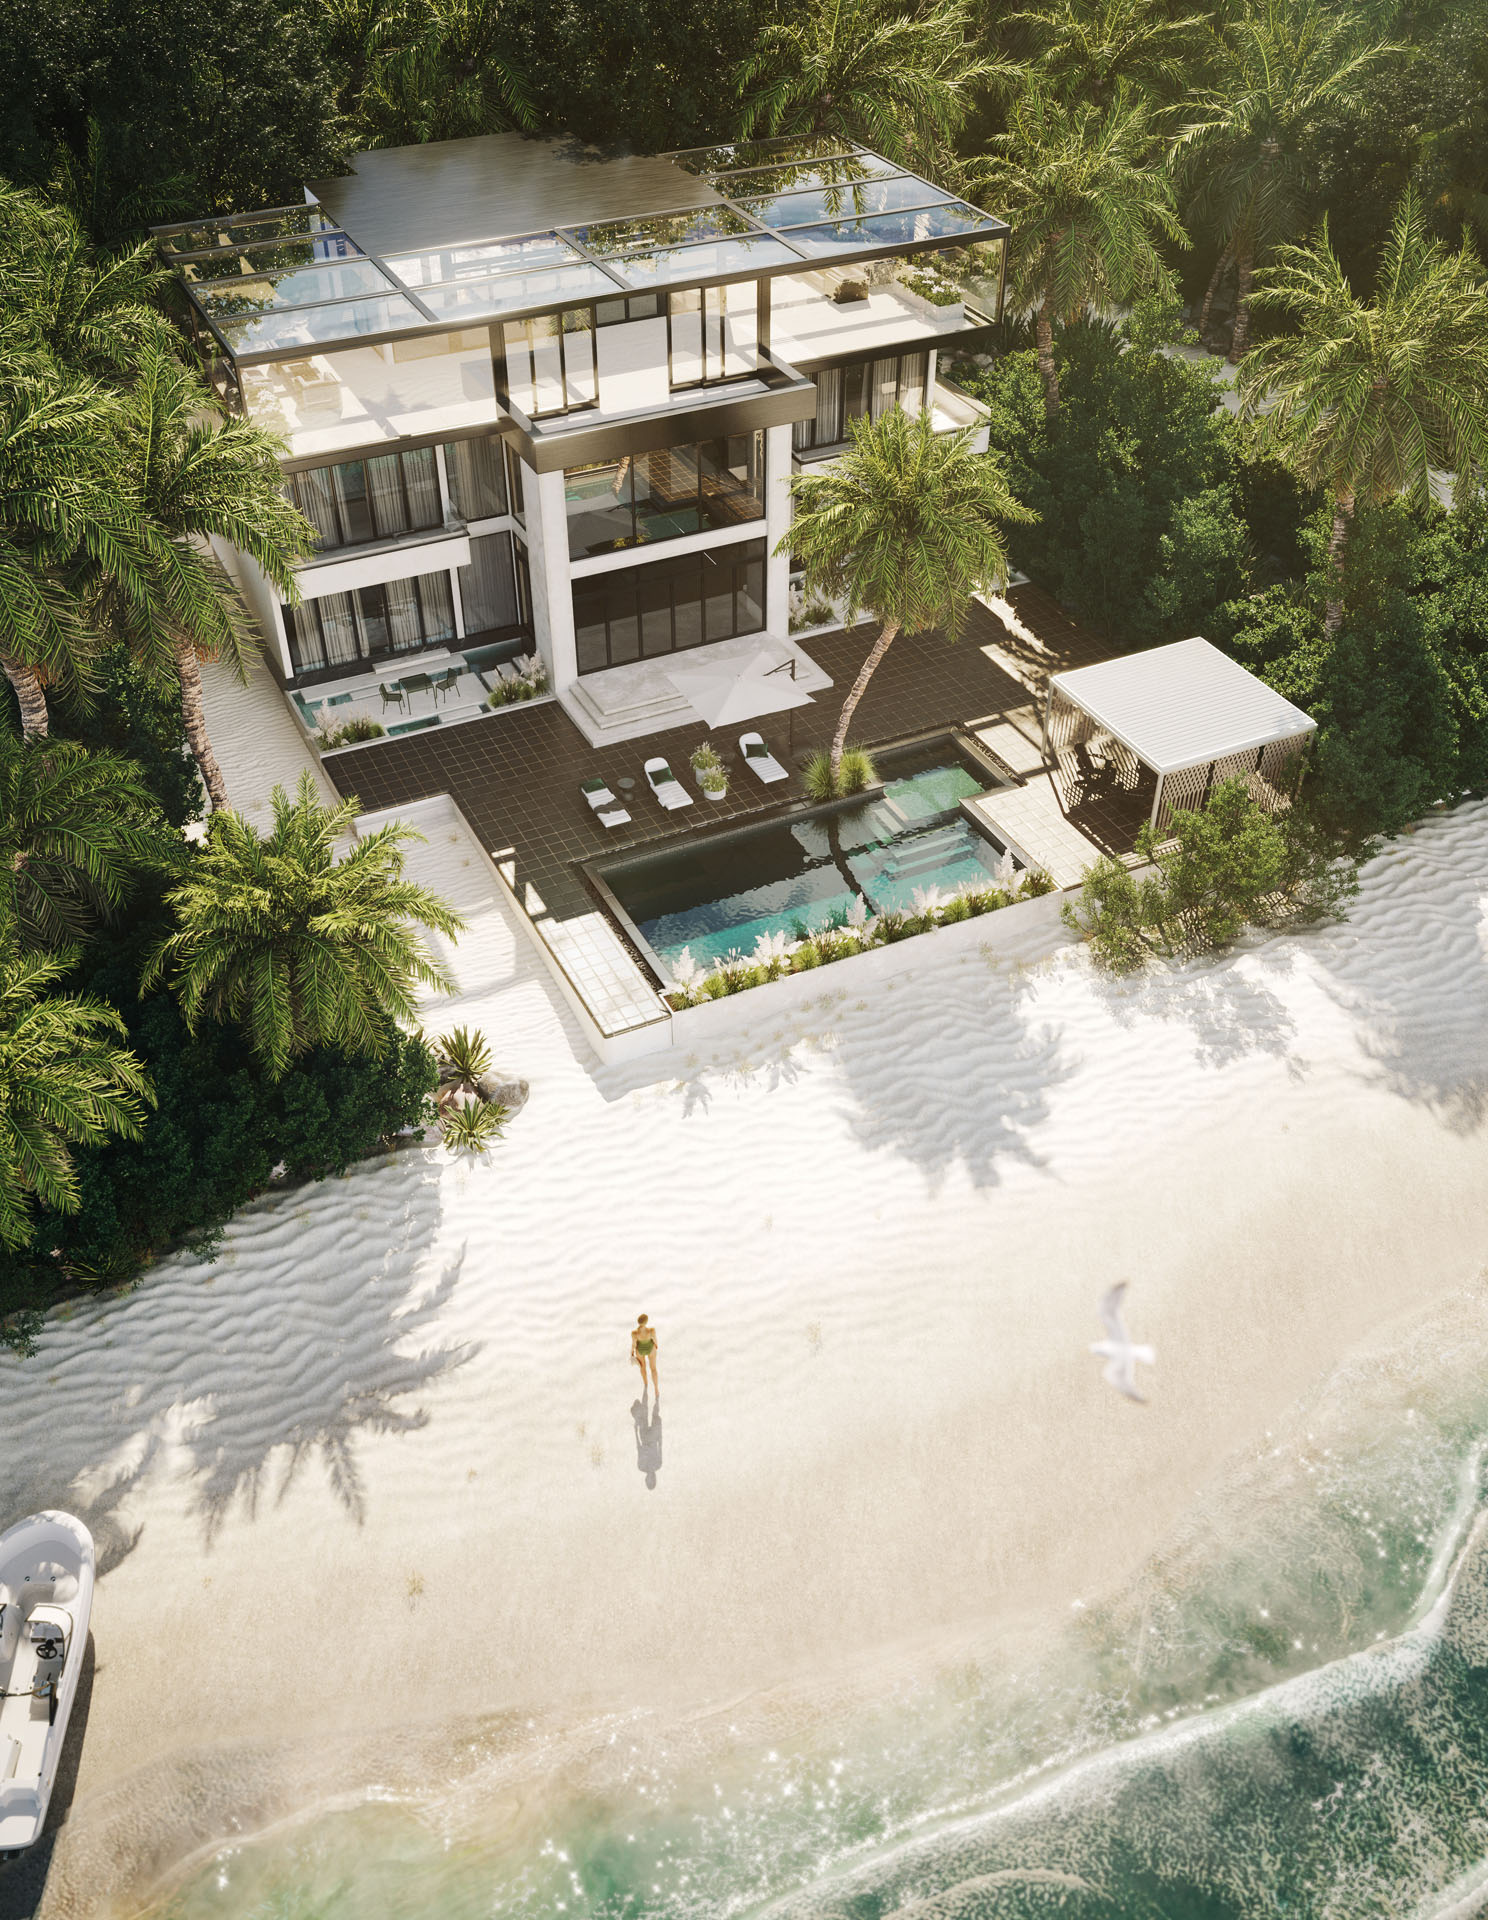 3D Renderings for Los Angeles Villa on the Beach Concept